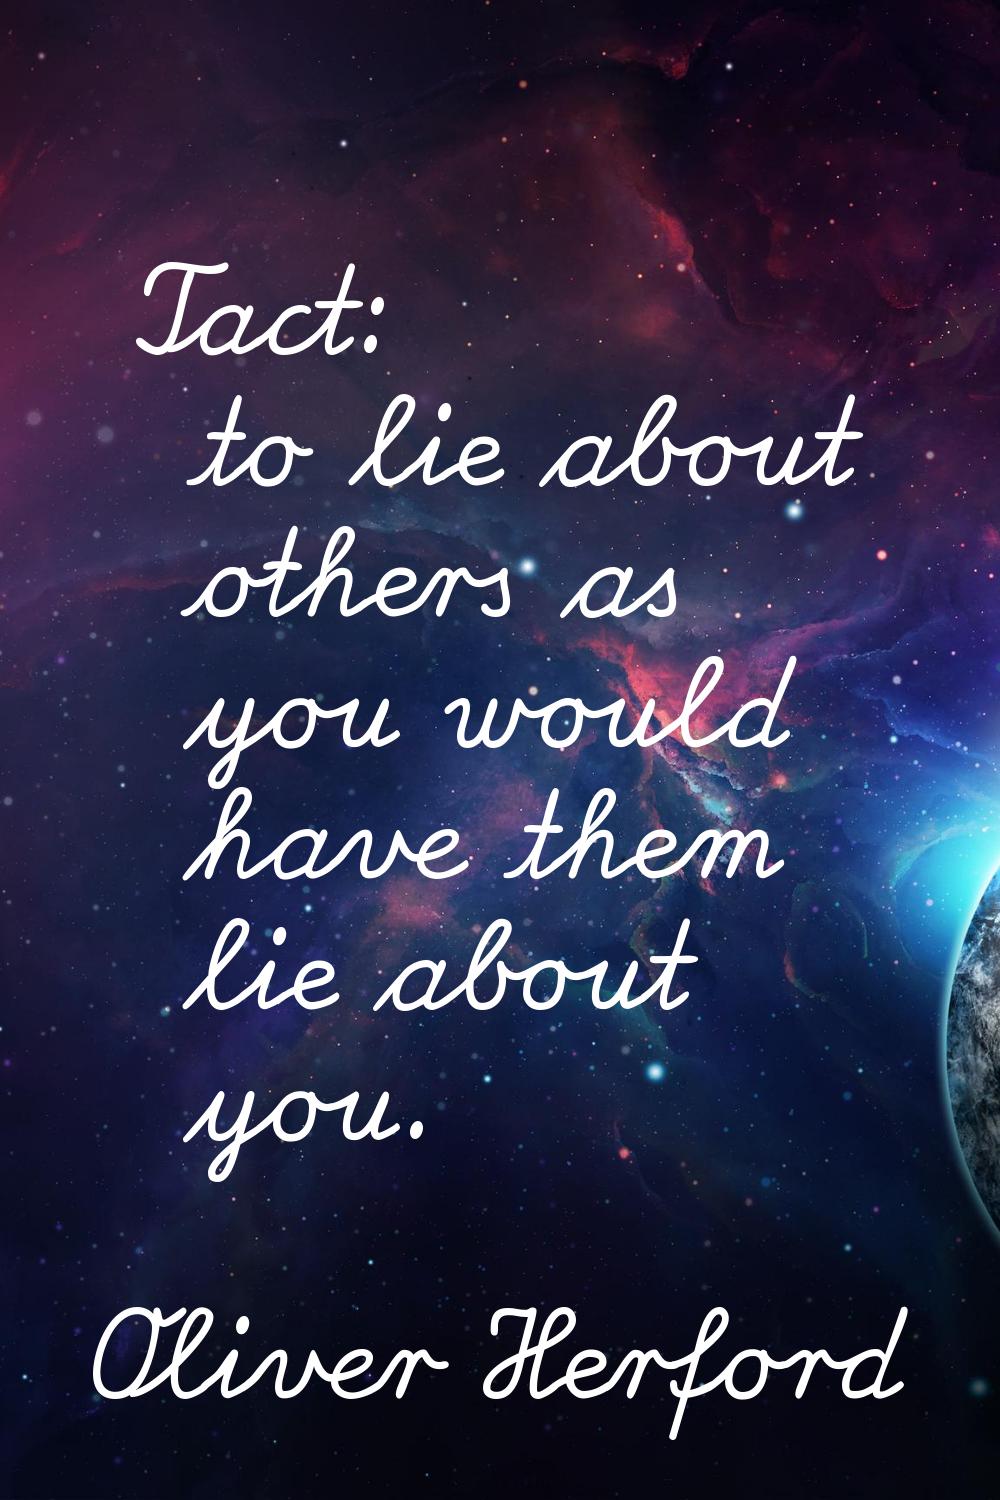 Tact: to lie about others as you would have them lie about you.